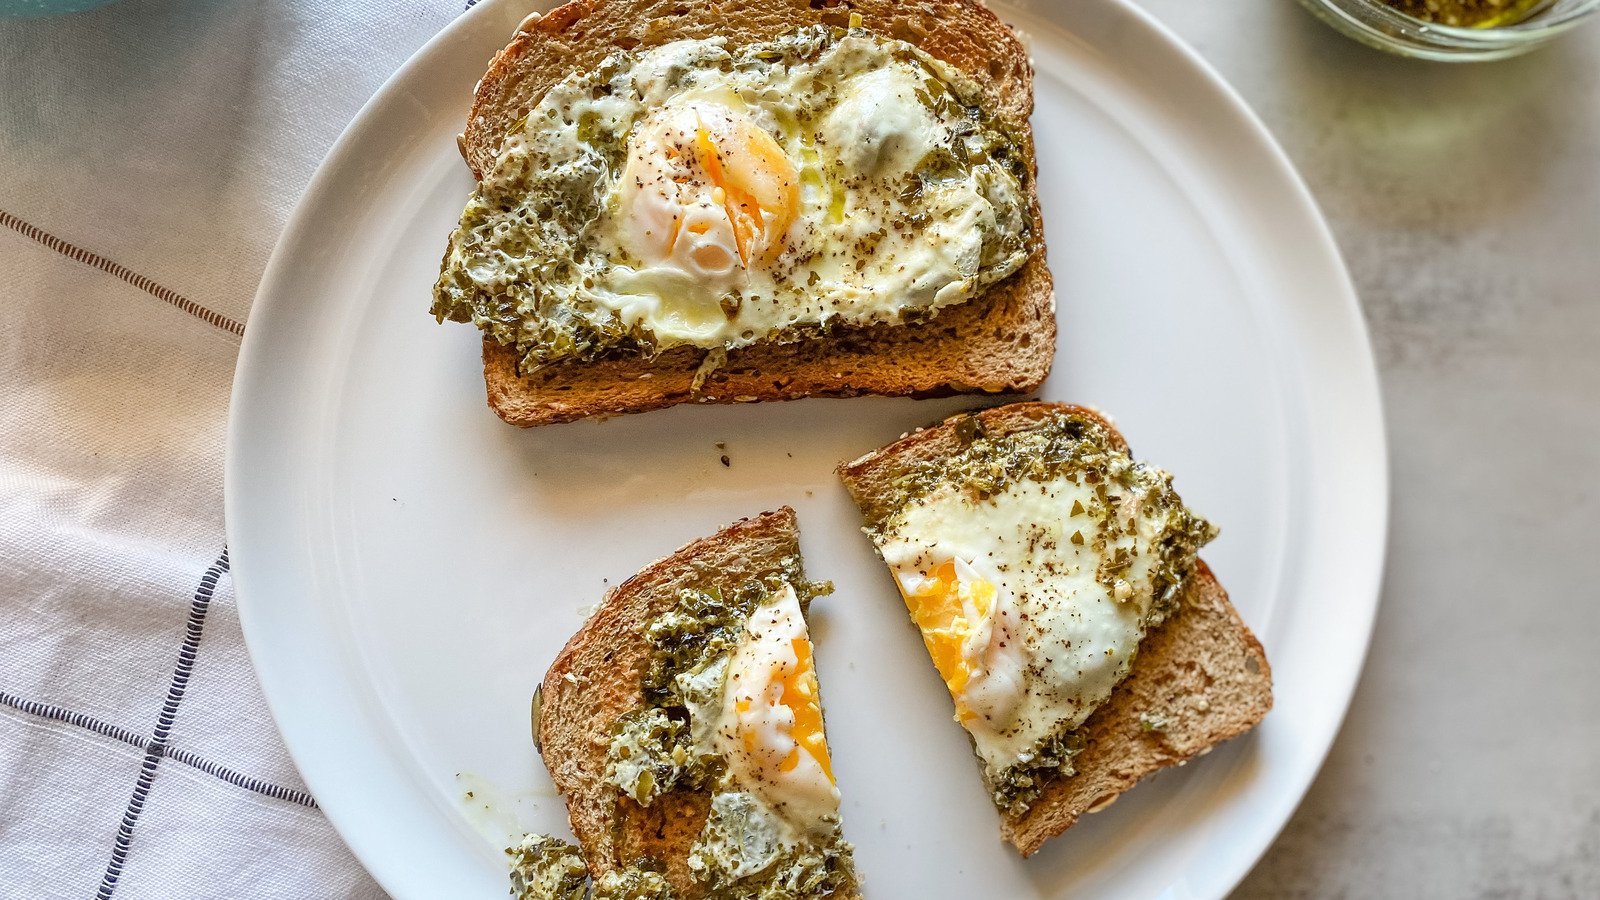 Pesto Eggs Recipe Are As Simple As They Are Tasty